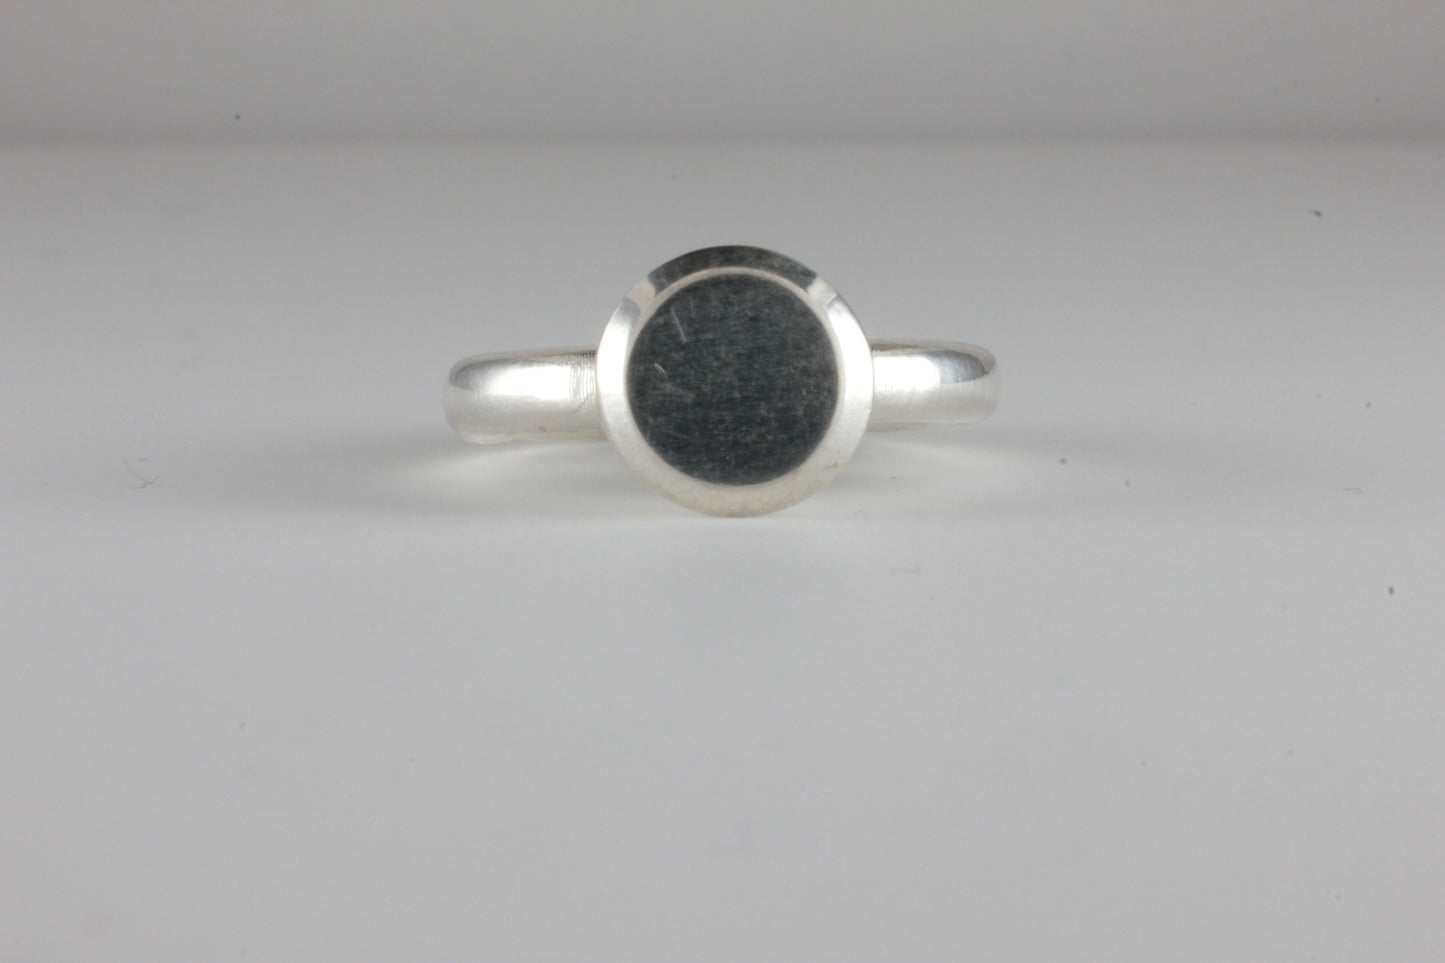 Double Bevel Disc Medieval style Signet Ring Silver C15th